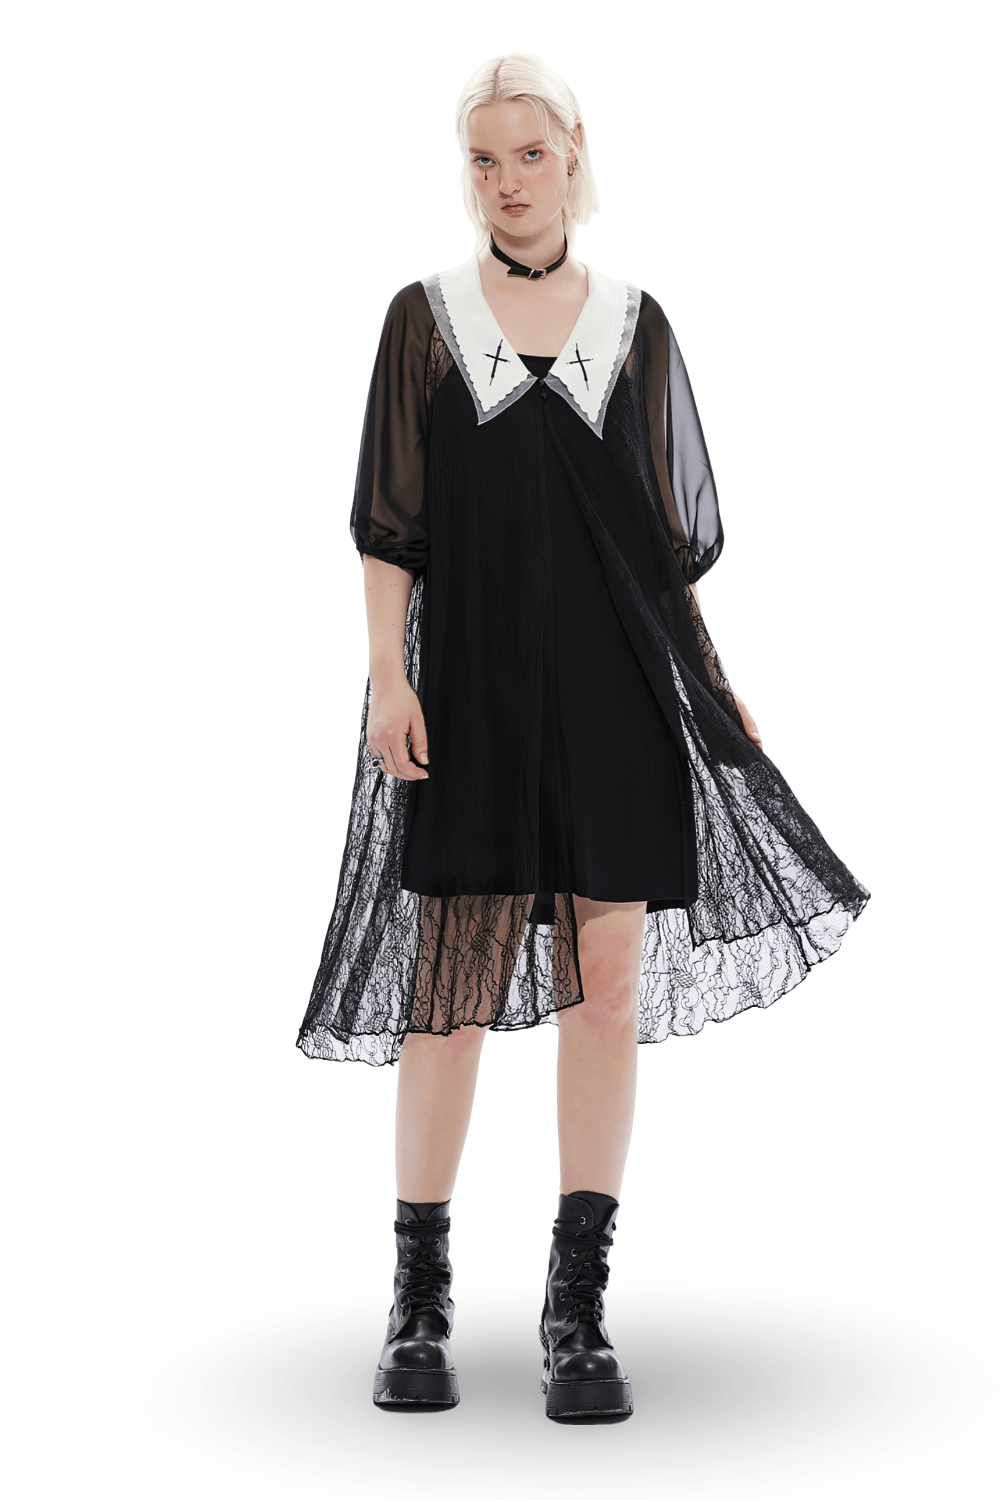 Gothic Black Lace Dress with White Peter Pan Collar